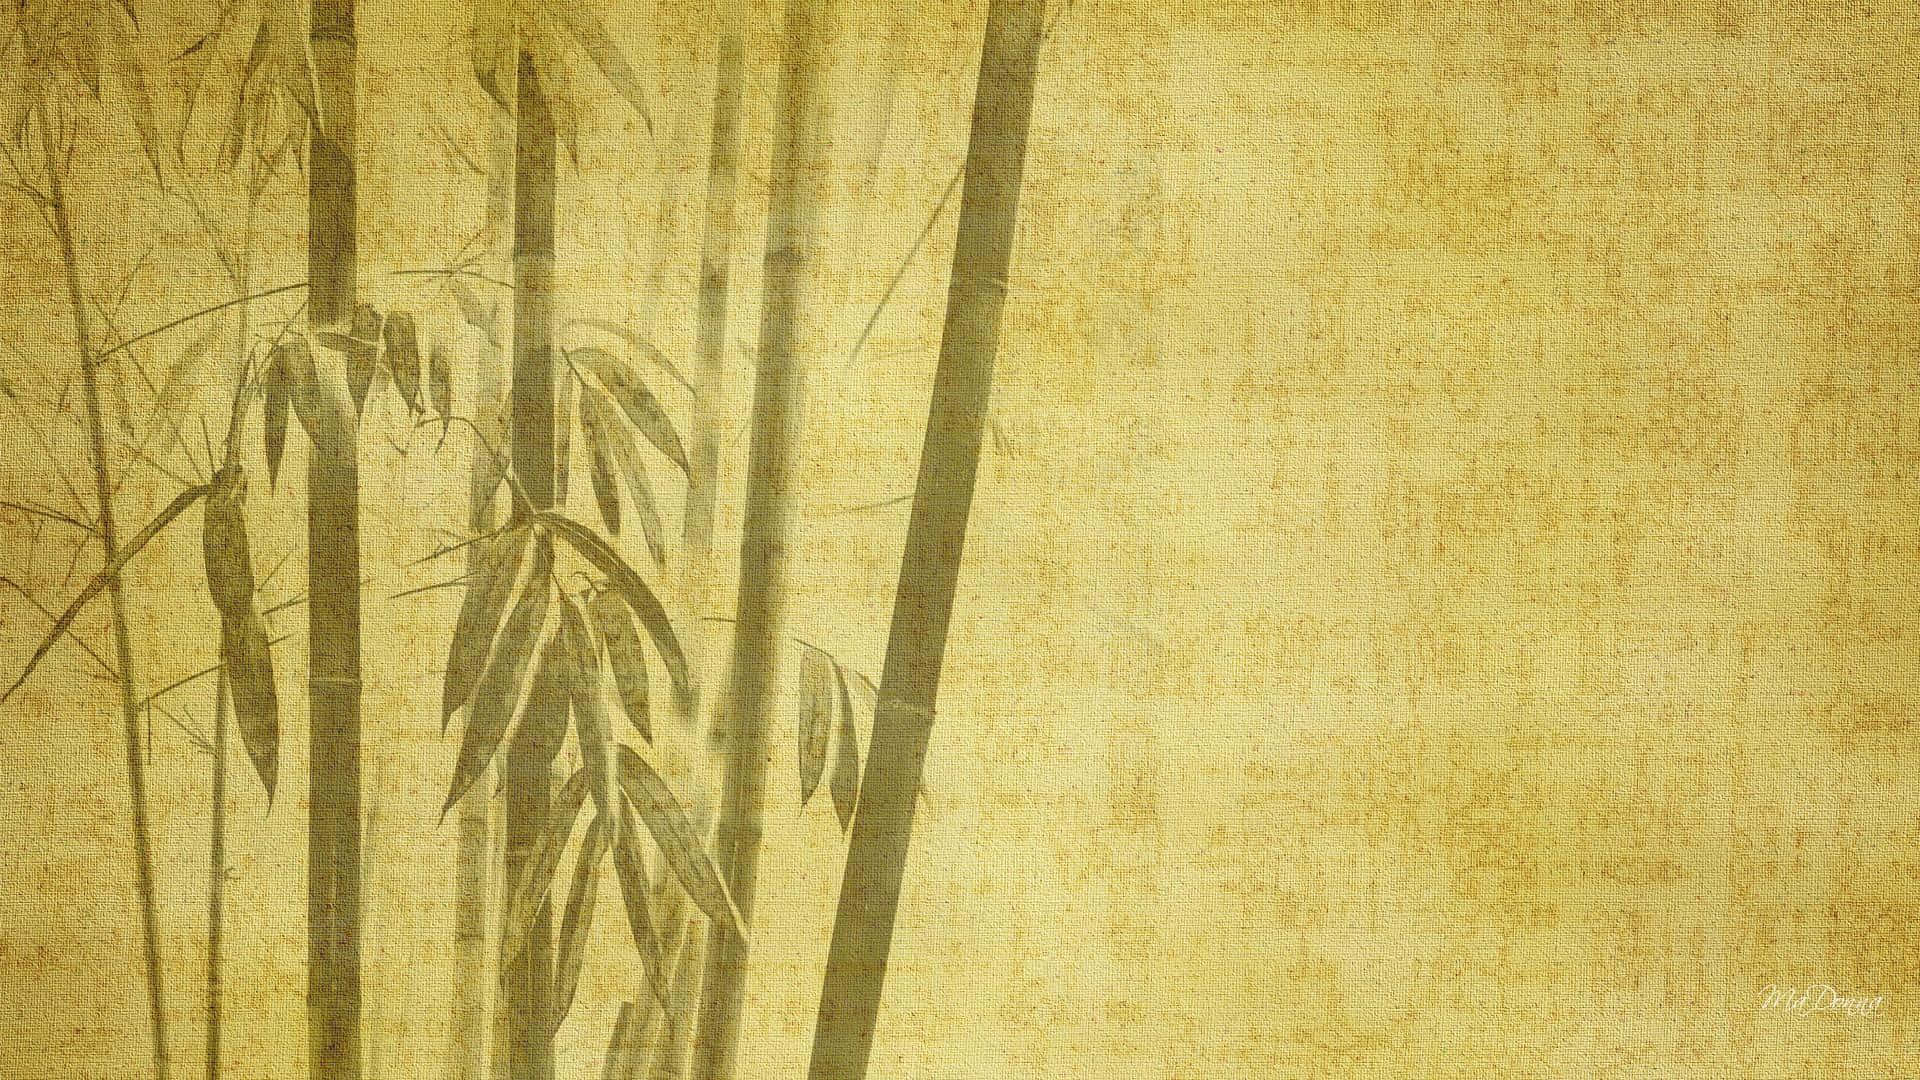 Enjoy a Relaxed and Peaceful Environment with a Bamboo Desktop Wallpaper